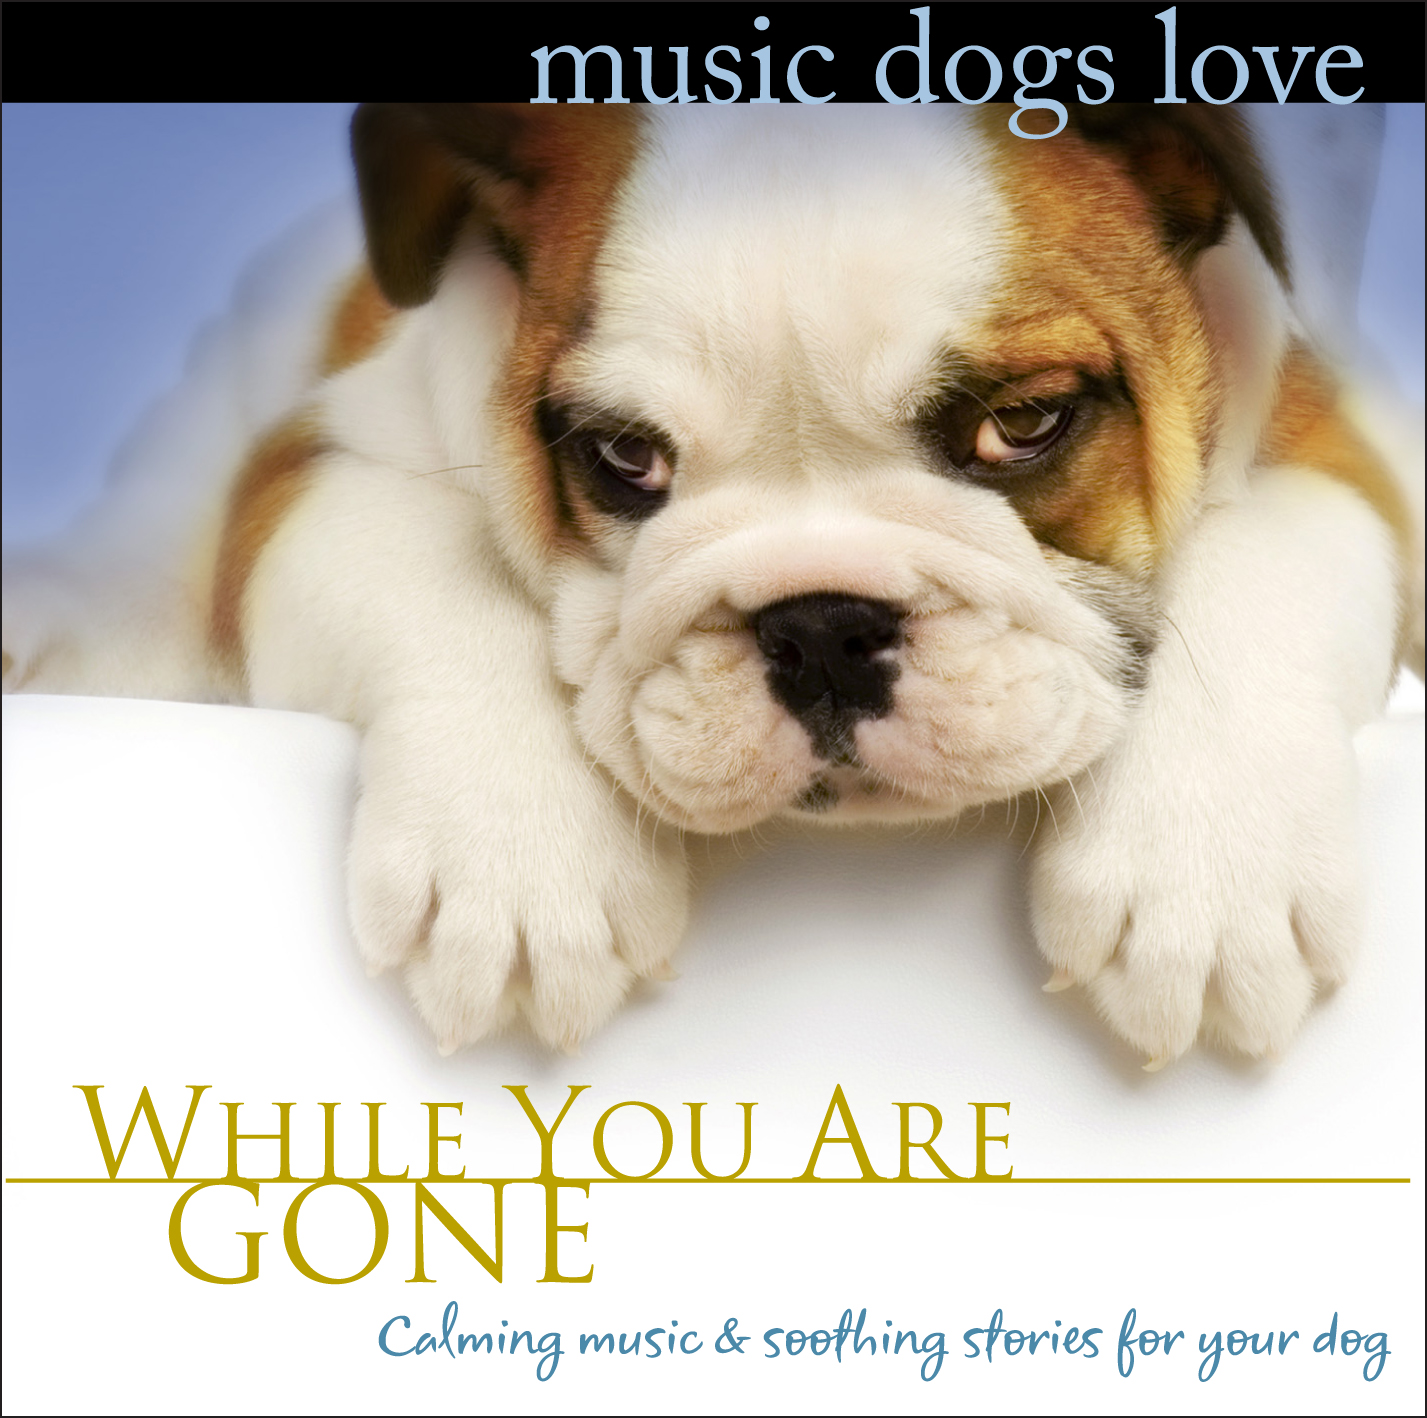 Music Dogs Love: While You Are Gone